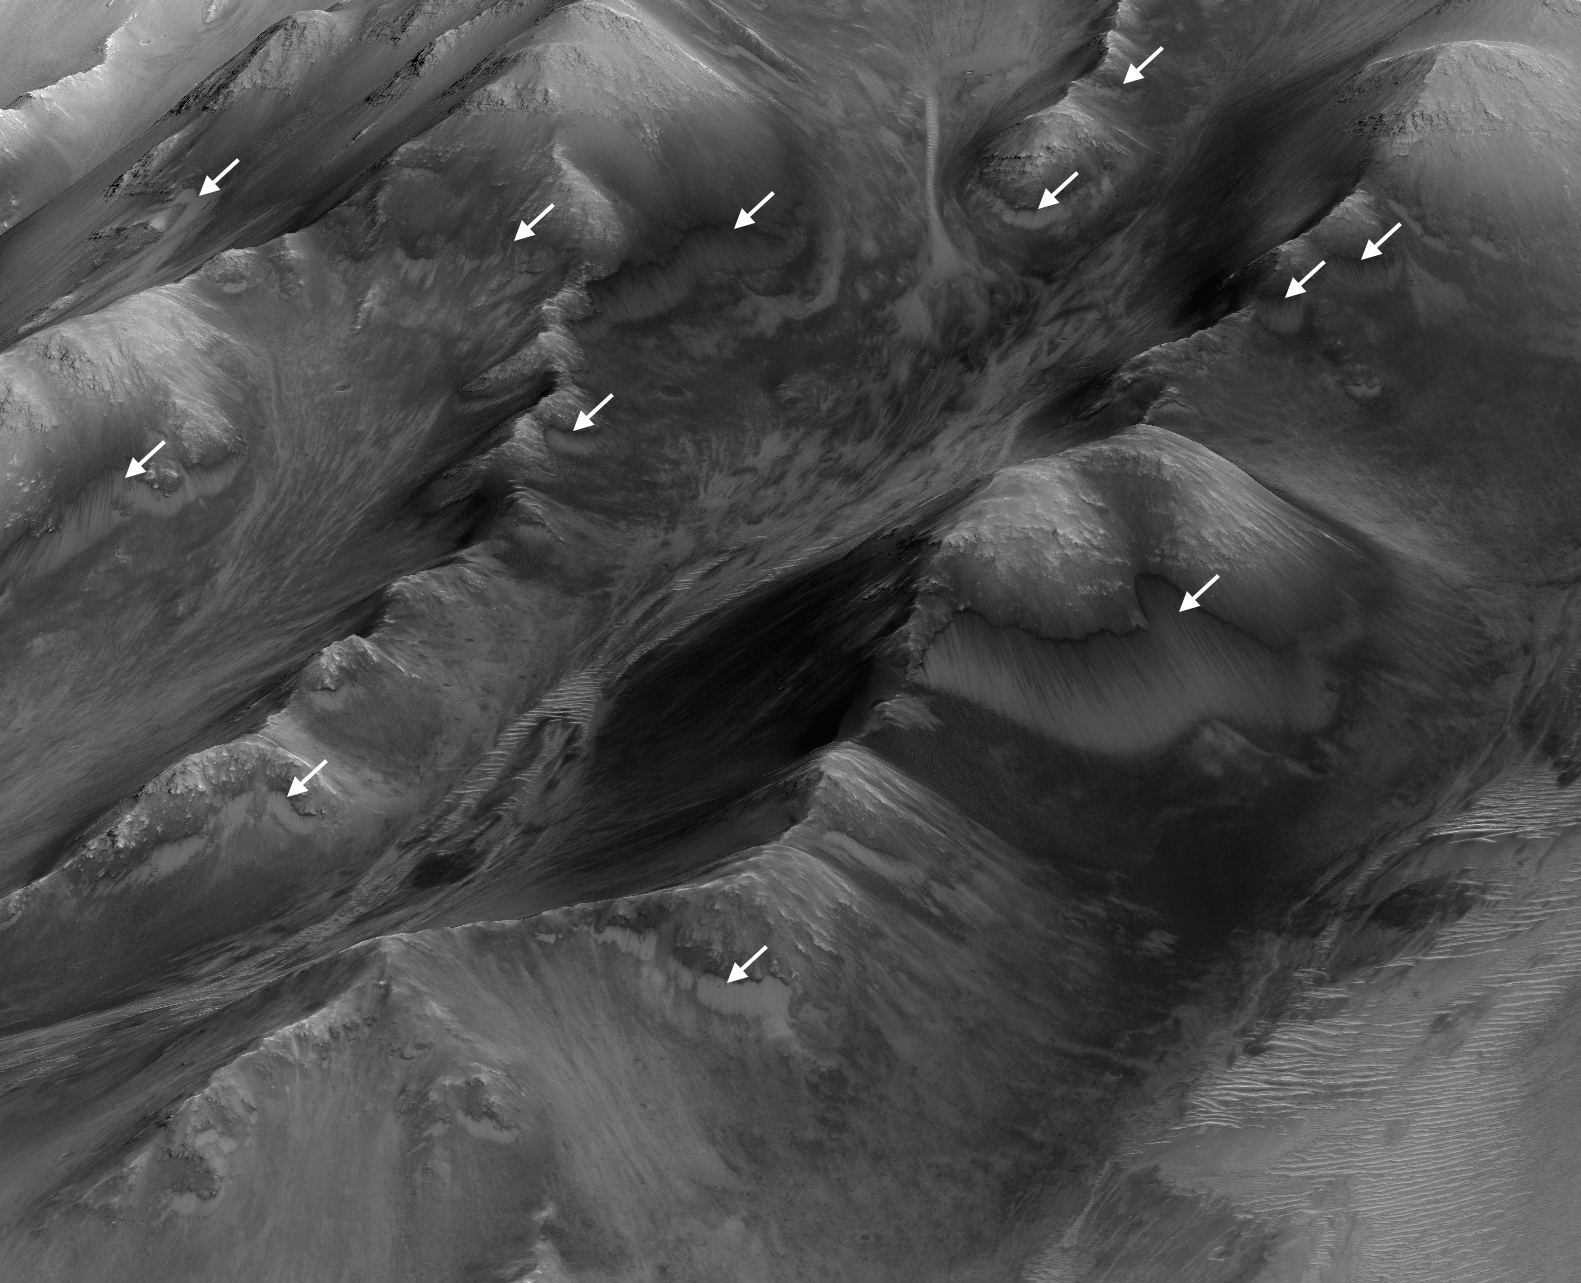 The white arrows indicate locations in this scene where numerous seasonal dark streaks, called "recurring slope lineae," have been identified in the Coprates Montes area of Mars' Valles Marineris by repeated observations from orbit.